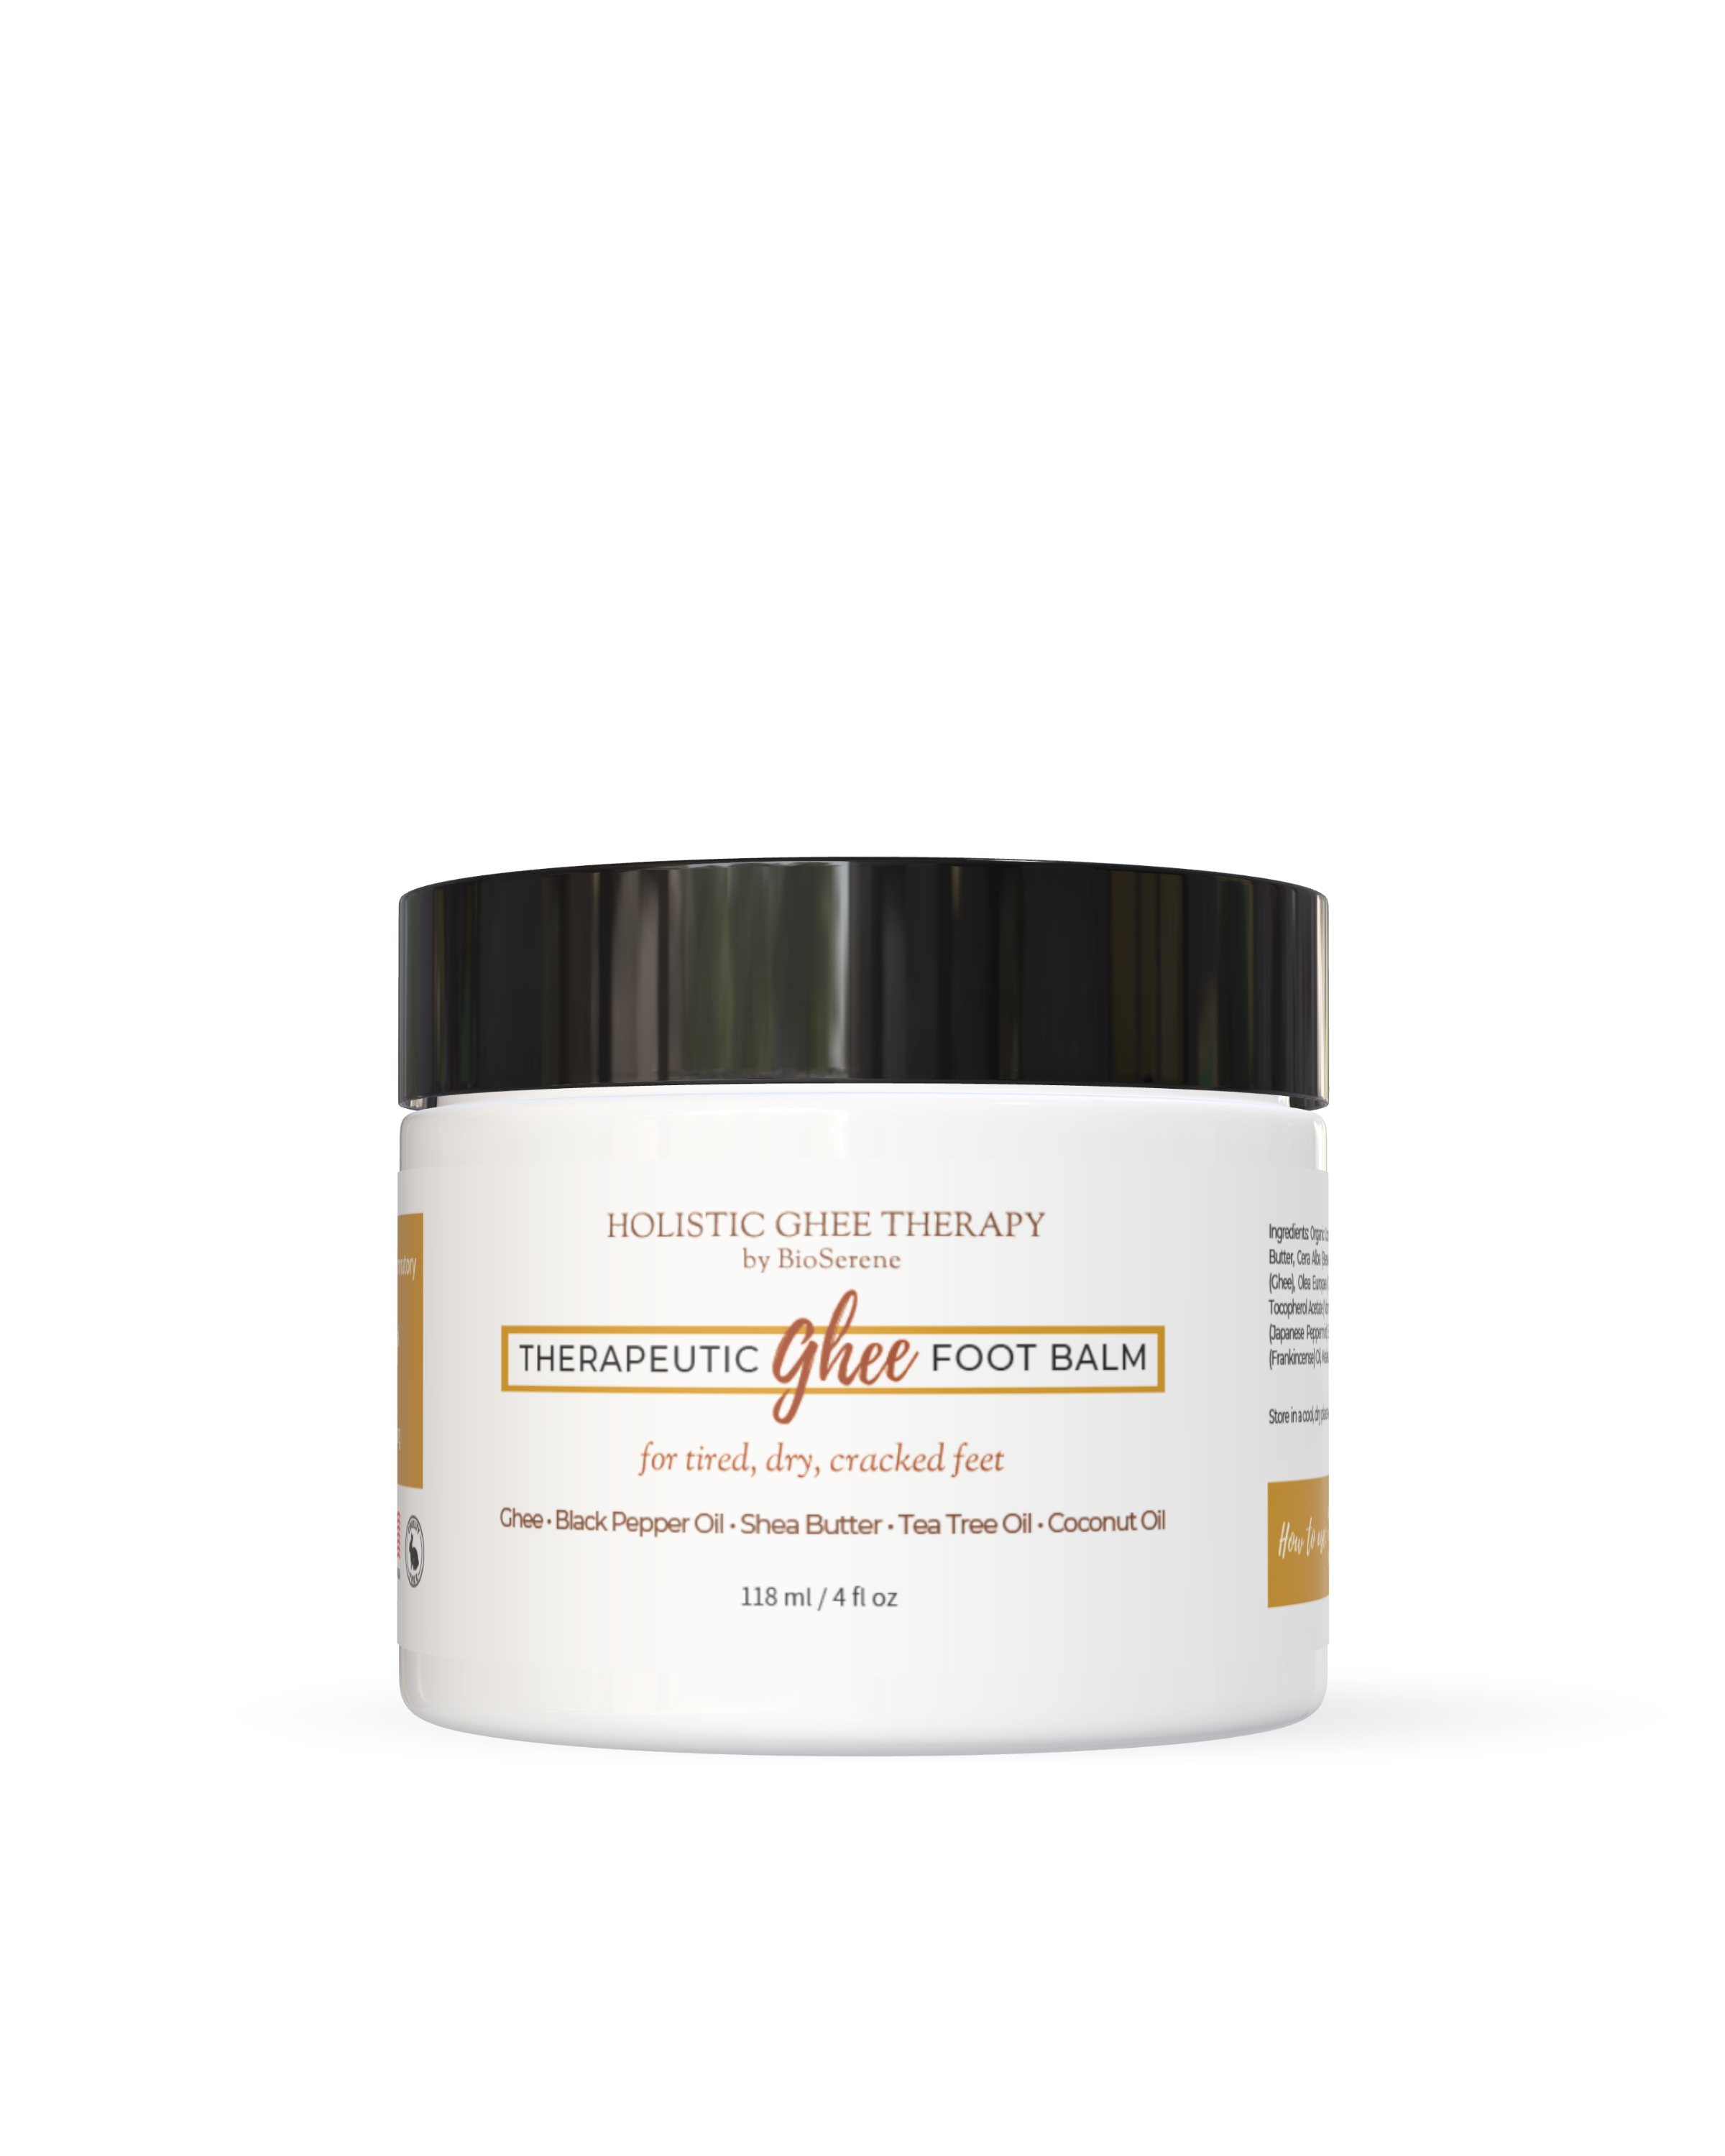 Therapeutic Ghee Foot Balm for Dry Feet & Cracked Heels